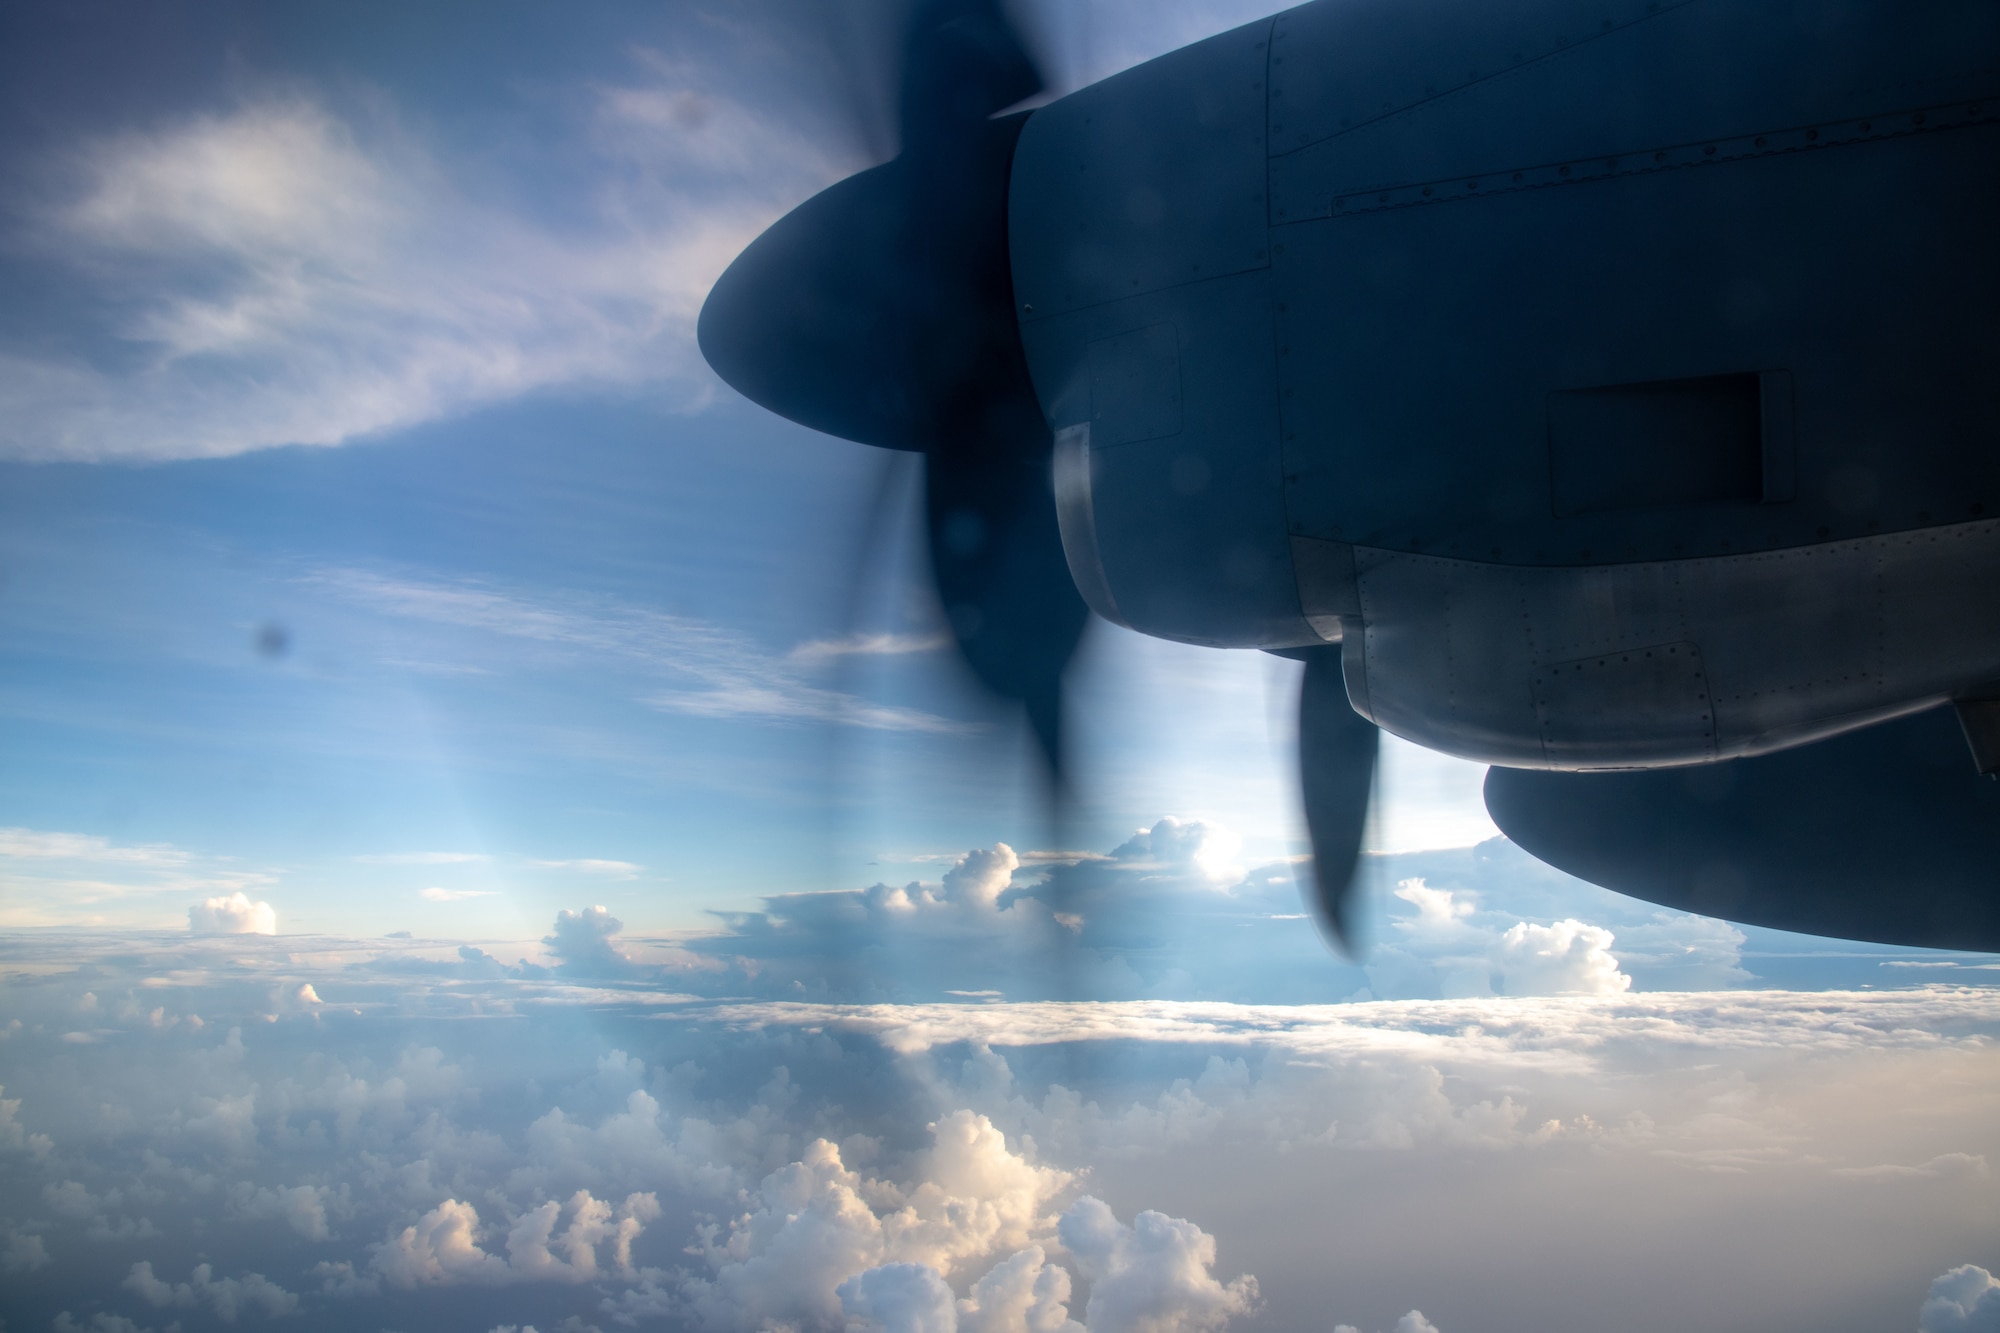 A WC-130J Super Hercules aircraft assigned to the 53rd Weather Reconnaissance Squadron at Keesler Air Force Base, Miss., approaches the outskirts of Hurricane Ida Aug. 27, 2021. The squadron flies into tropical systems to collect atmospheric data for forecasting purposes and is the only one of its kind in the Department of Defense. (U.S. Air Force photo by Staff Sgt. Kristen Pittman)